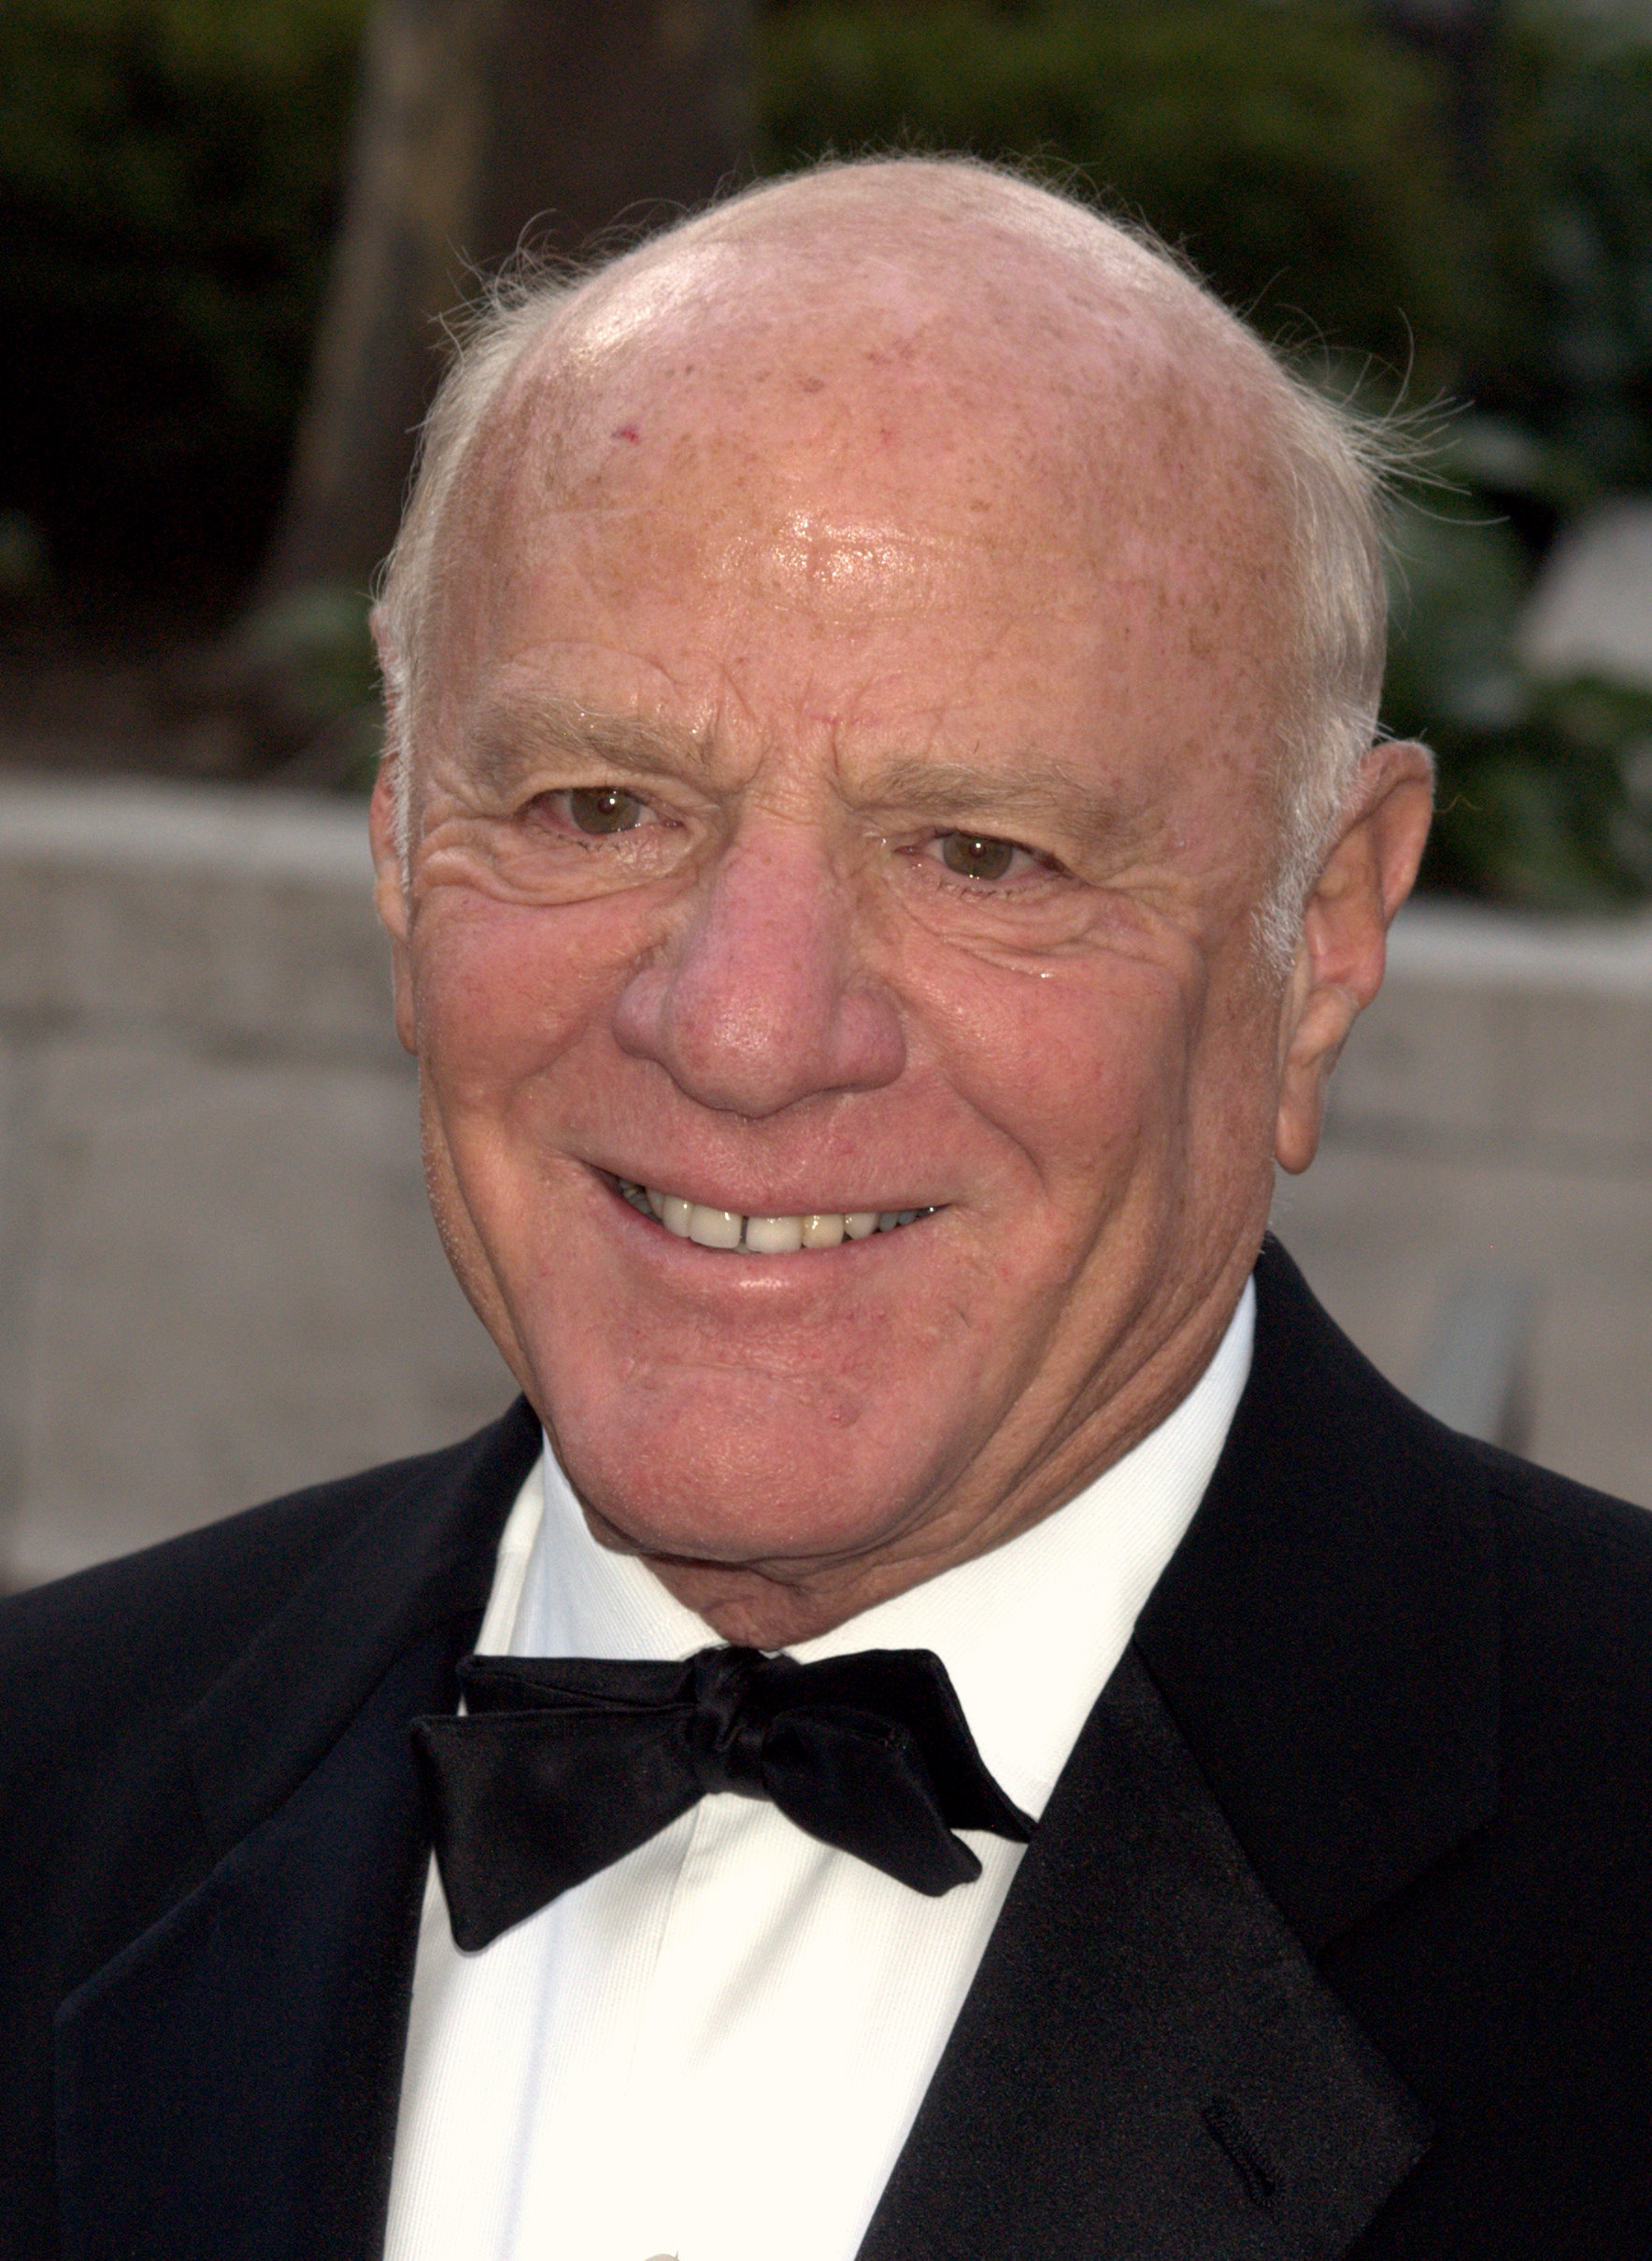 Barry Diller at the opera a few years ago. His Pier55 project would feature extensive entertainment programming, 51 percent of which would be free or low-cost, and the rest which would be at higher ticket prices. Photo by David Shinbone.